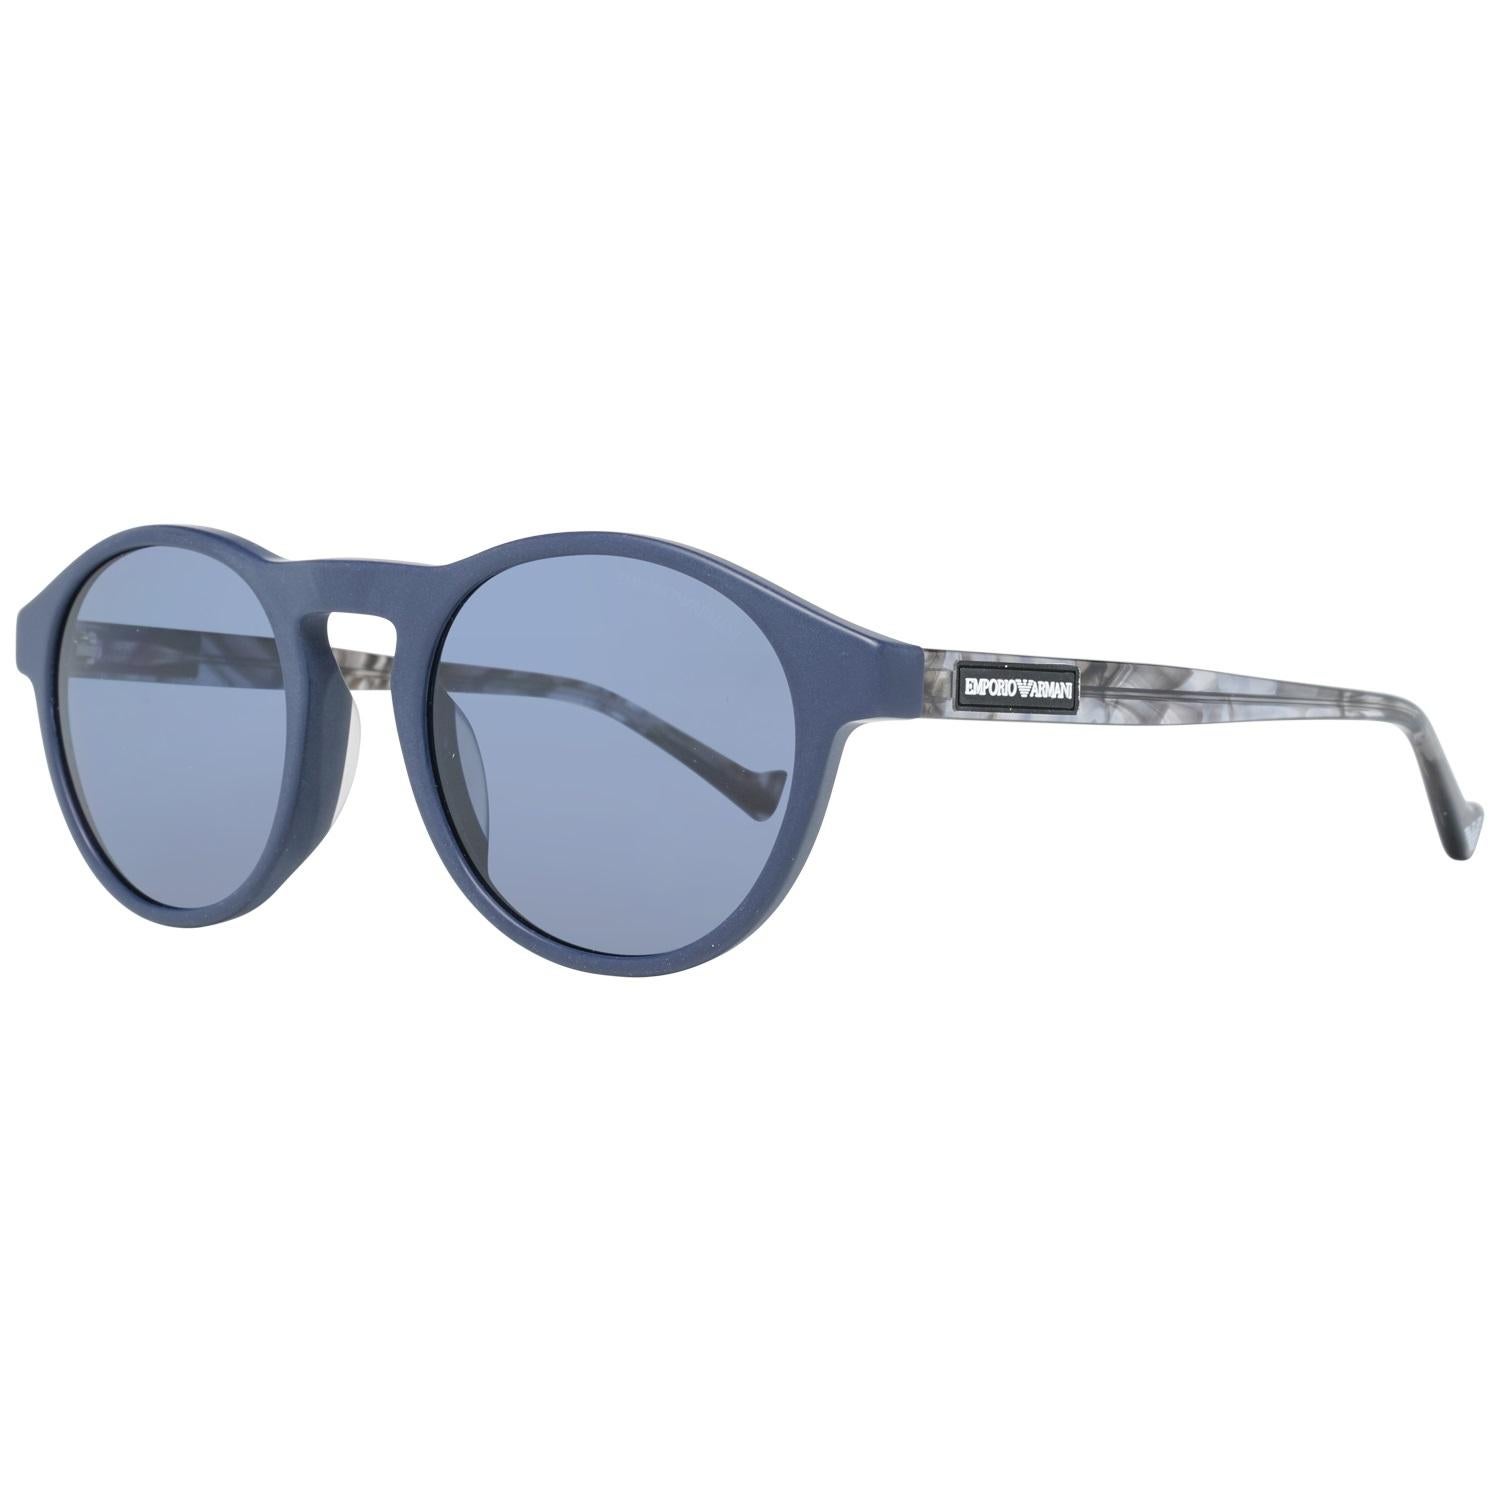 Details
MATERIAL: Acetate
COLOR: Blue
MODEL: EA4138F 5257542V
GENDER: Adult Unisex
COUNTRY OF MANUFACTURE: China
TYPE: Sunglasses
ORIGINAL CASE?: Yes
STYLE: Oval
OCCASION: Casual
FEATURES: Lightweight
LENS COLOR: Blue
LENS TECHNOLOGY: Polarized
YEAR